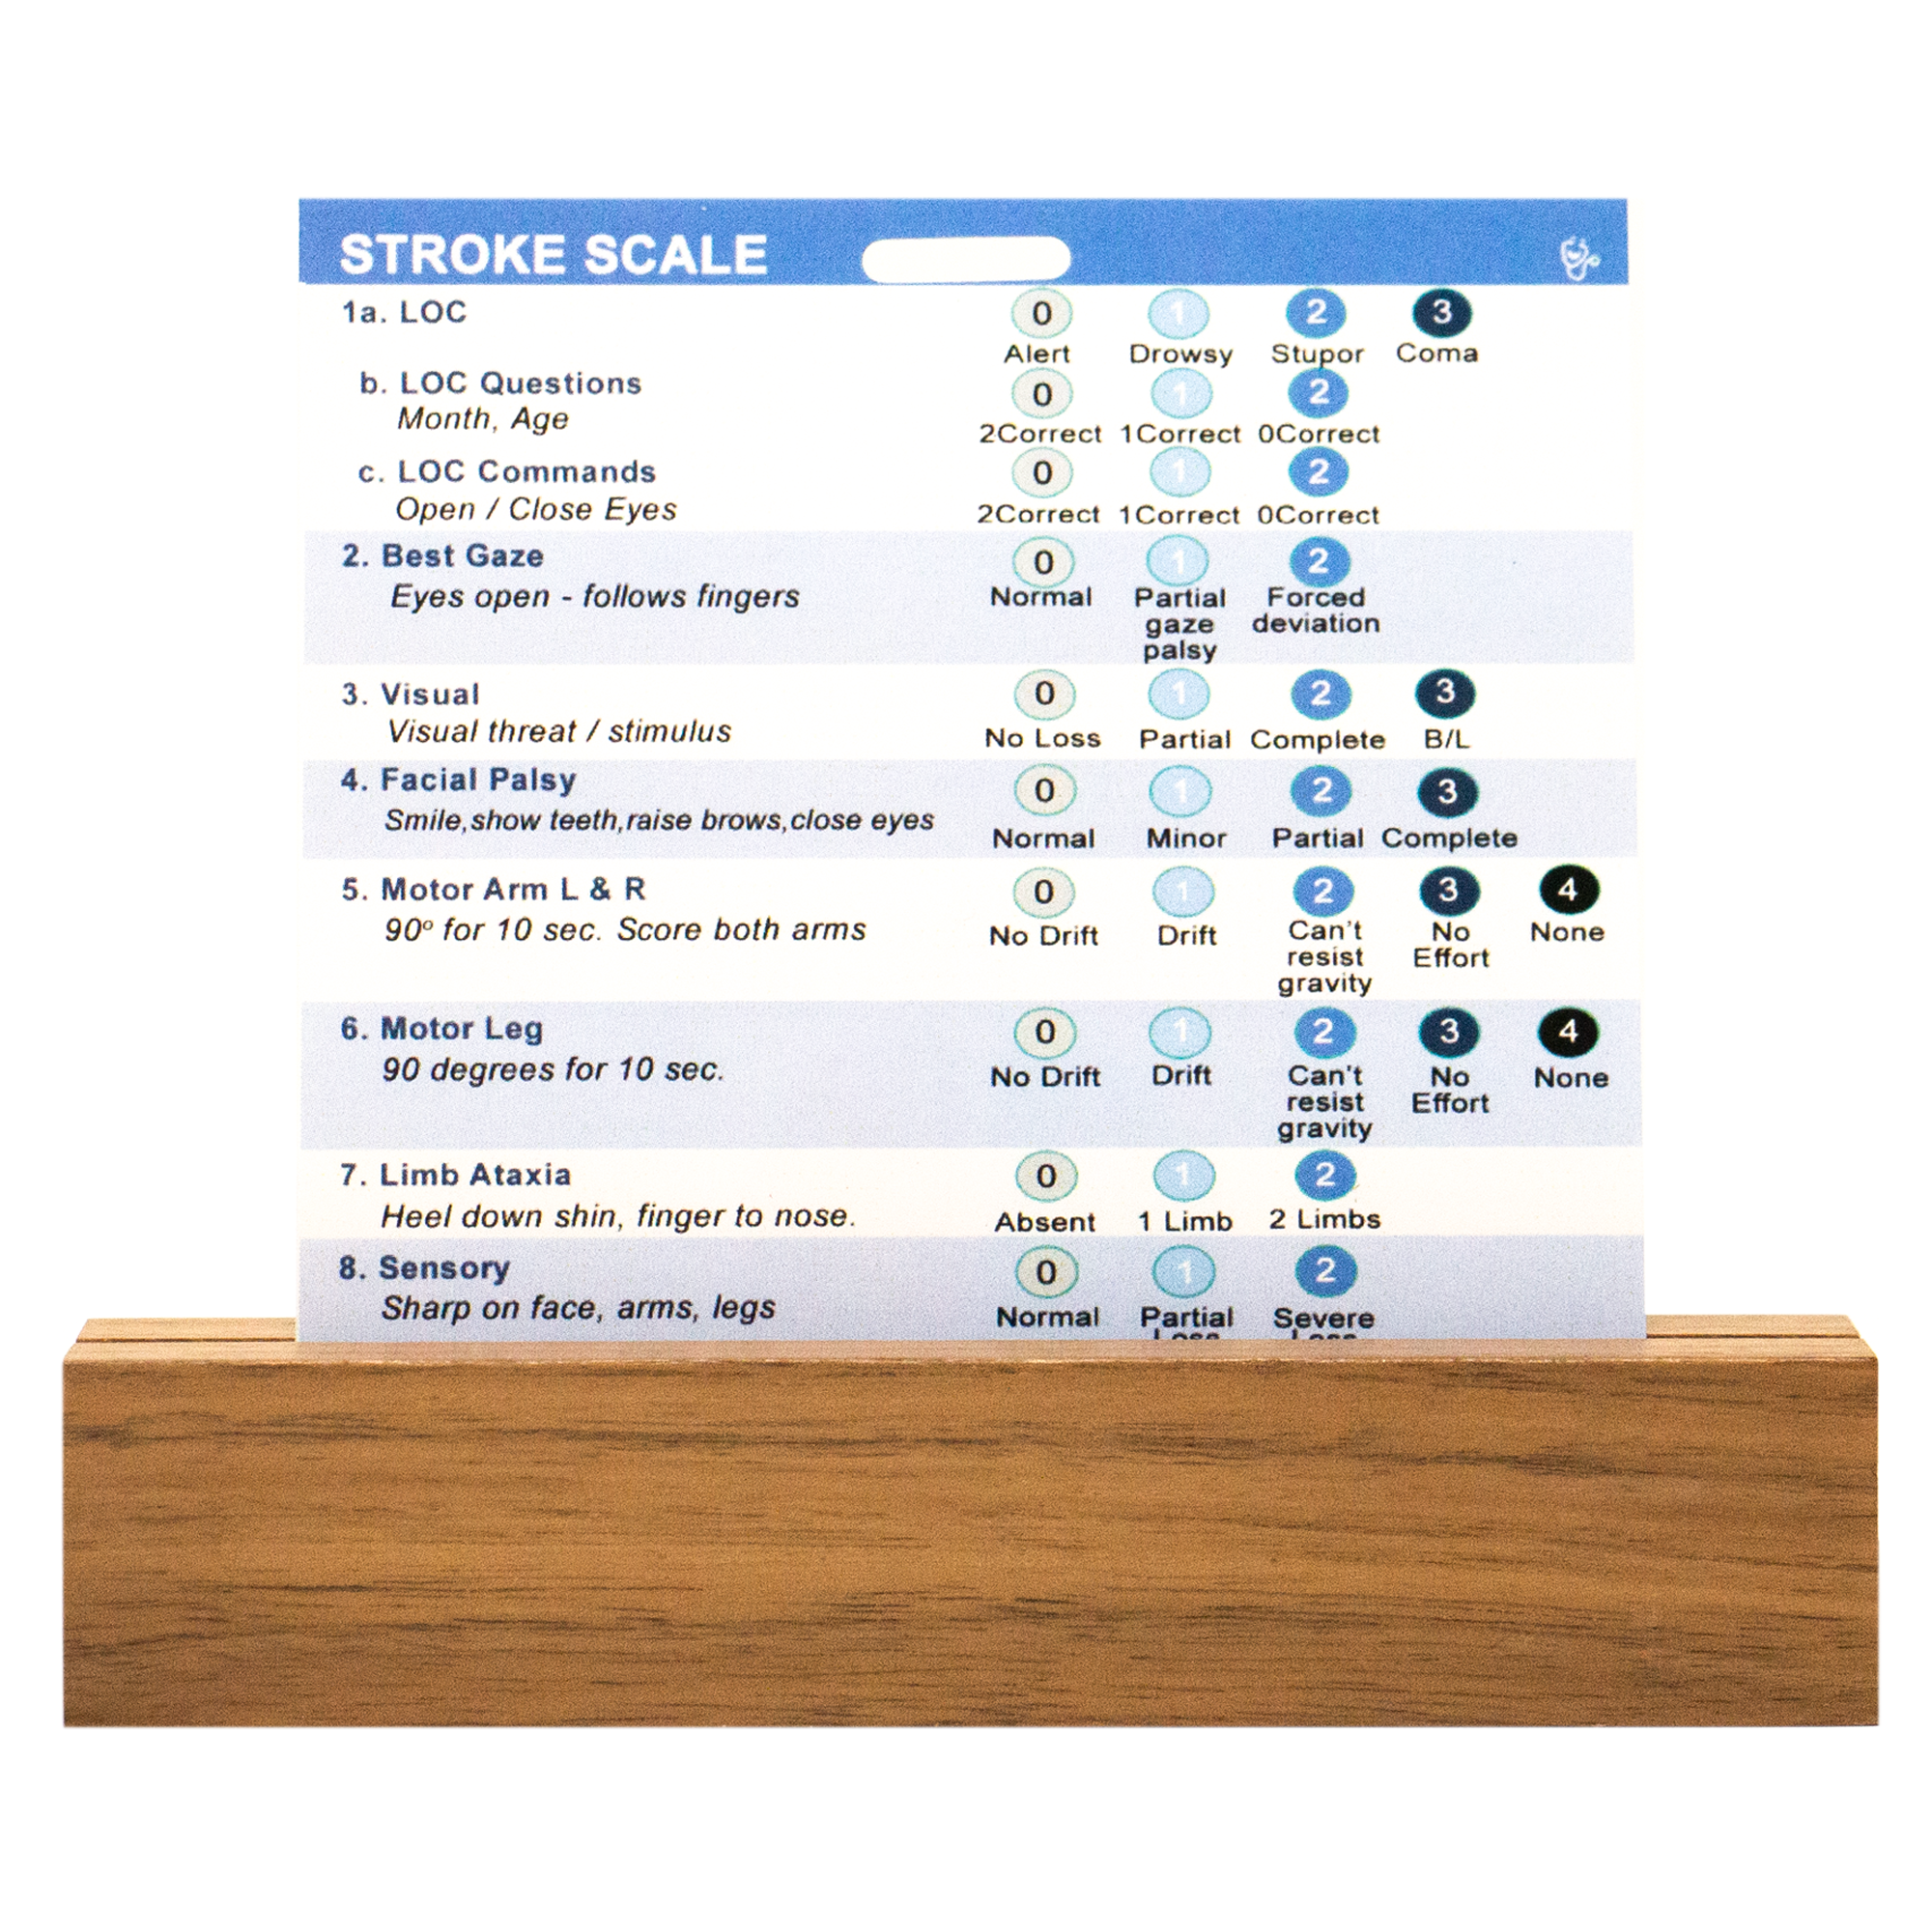 Side one of our stroke scale badge buddy contains scale items 1-9.